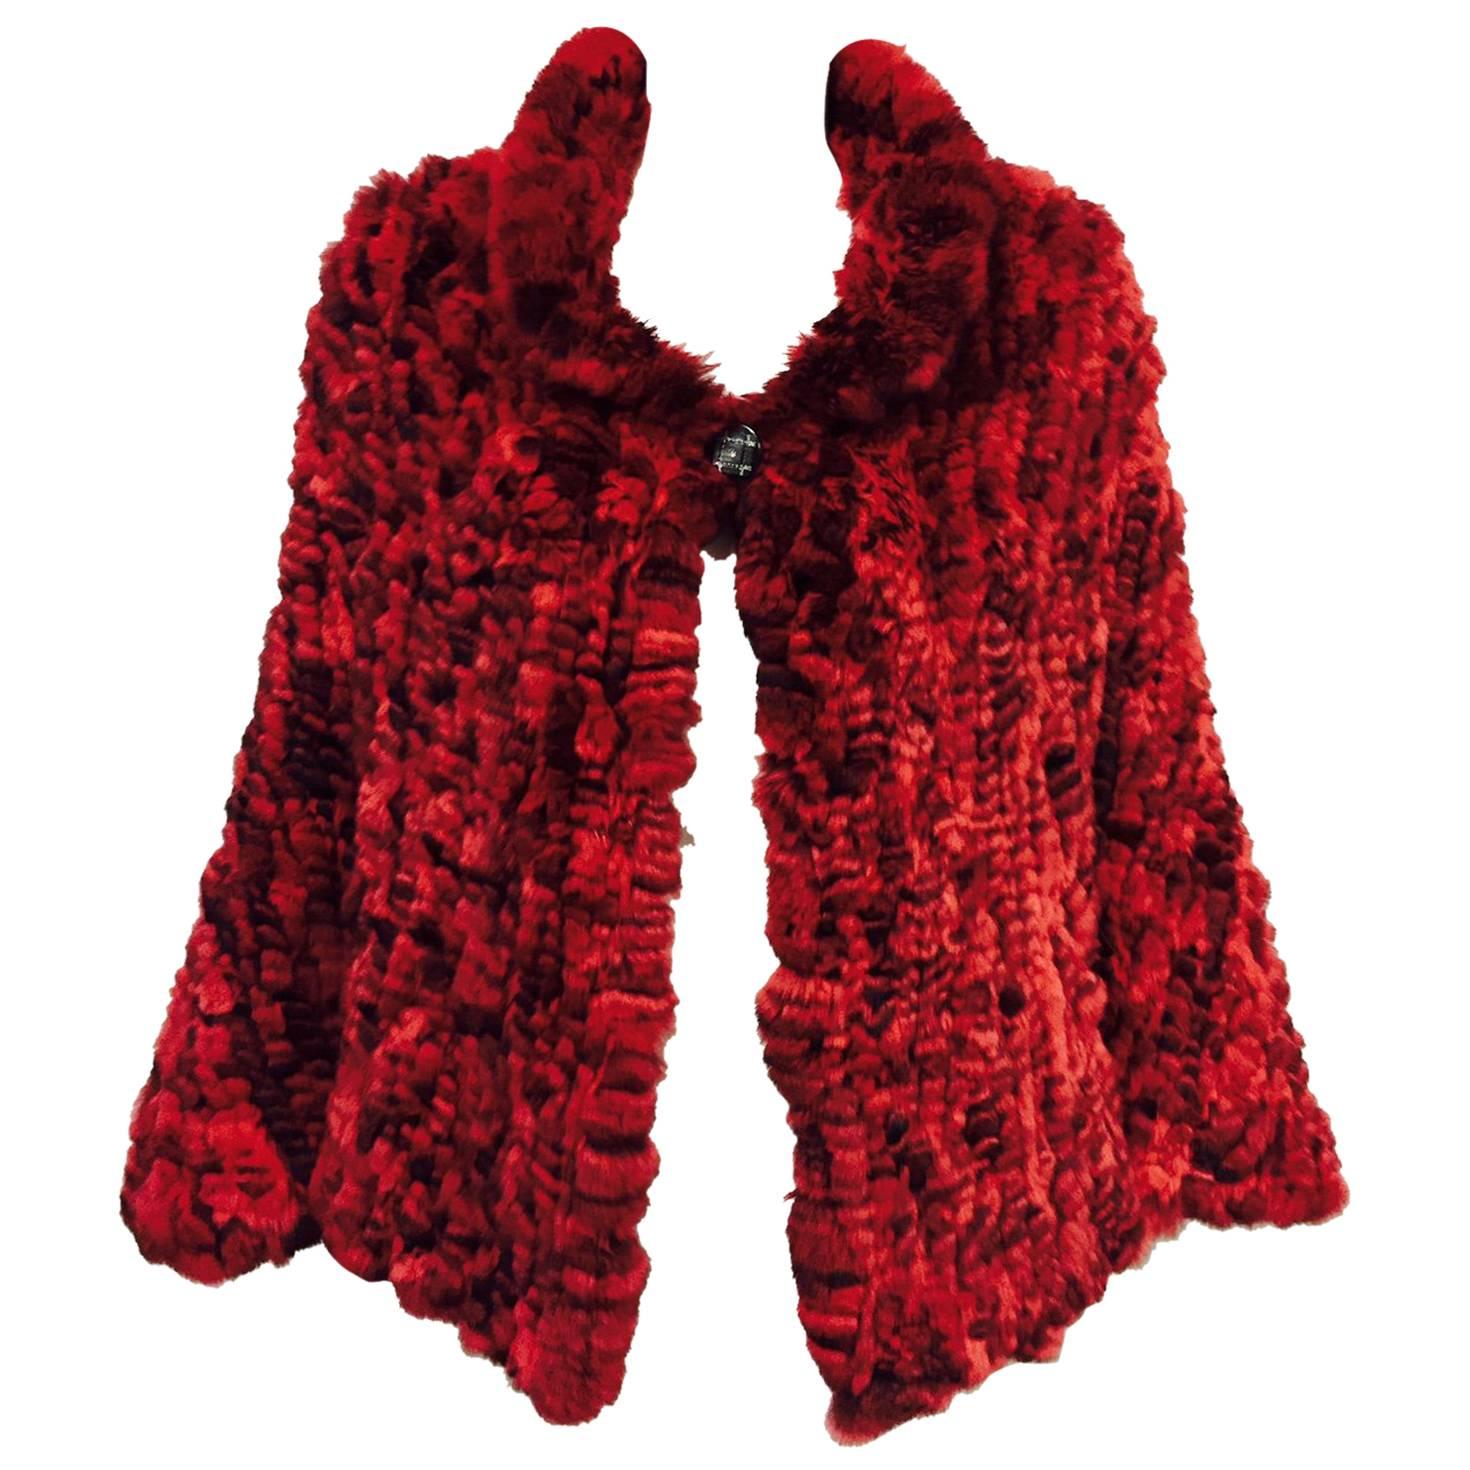  Dramatic Dyed and Knitted Rabbit Cape With Single Button at Neck For Sale